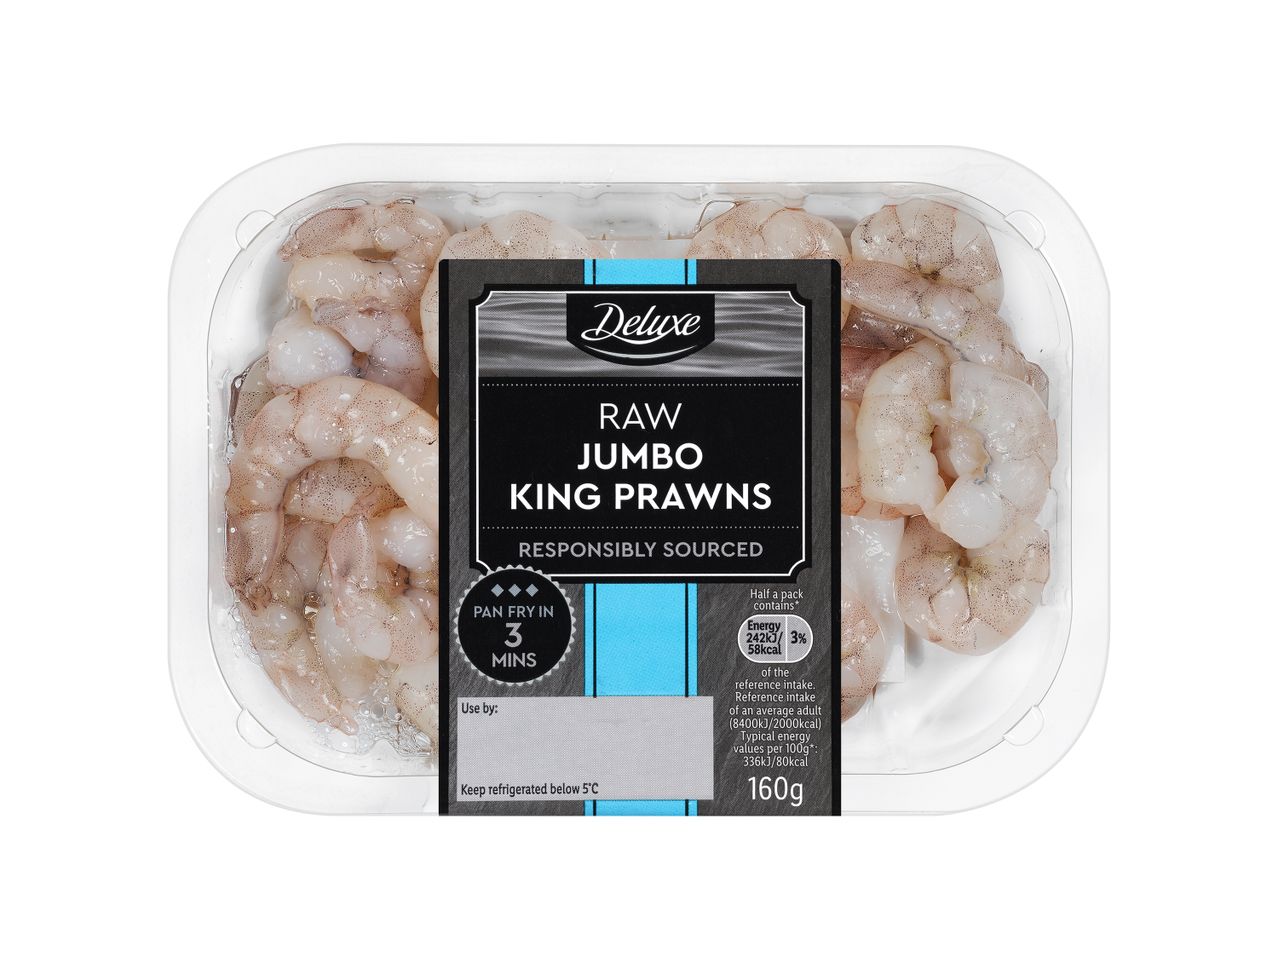 Go to full screen view: Deluxe Raw King Prawns - Image 1